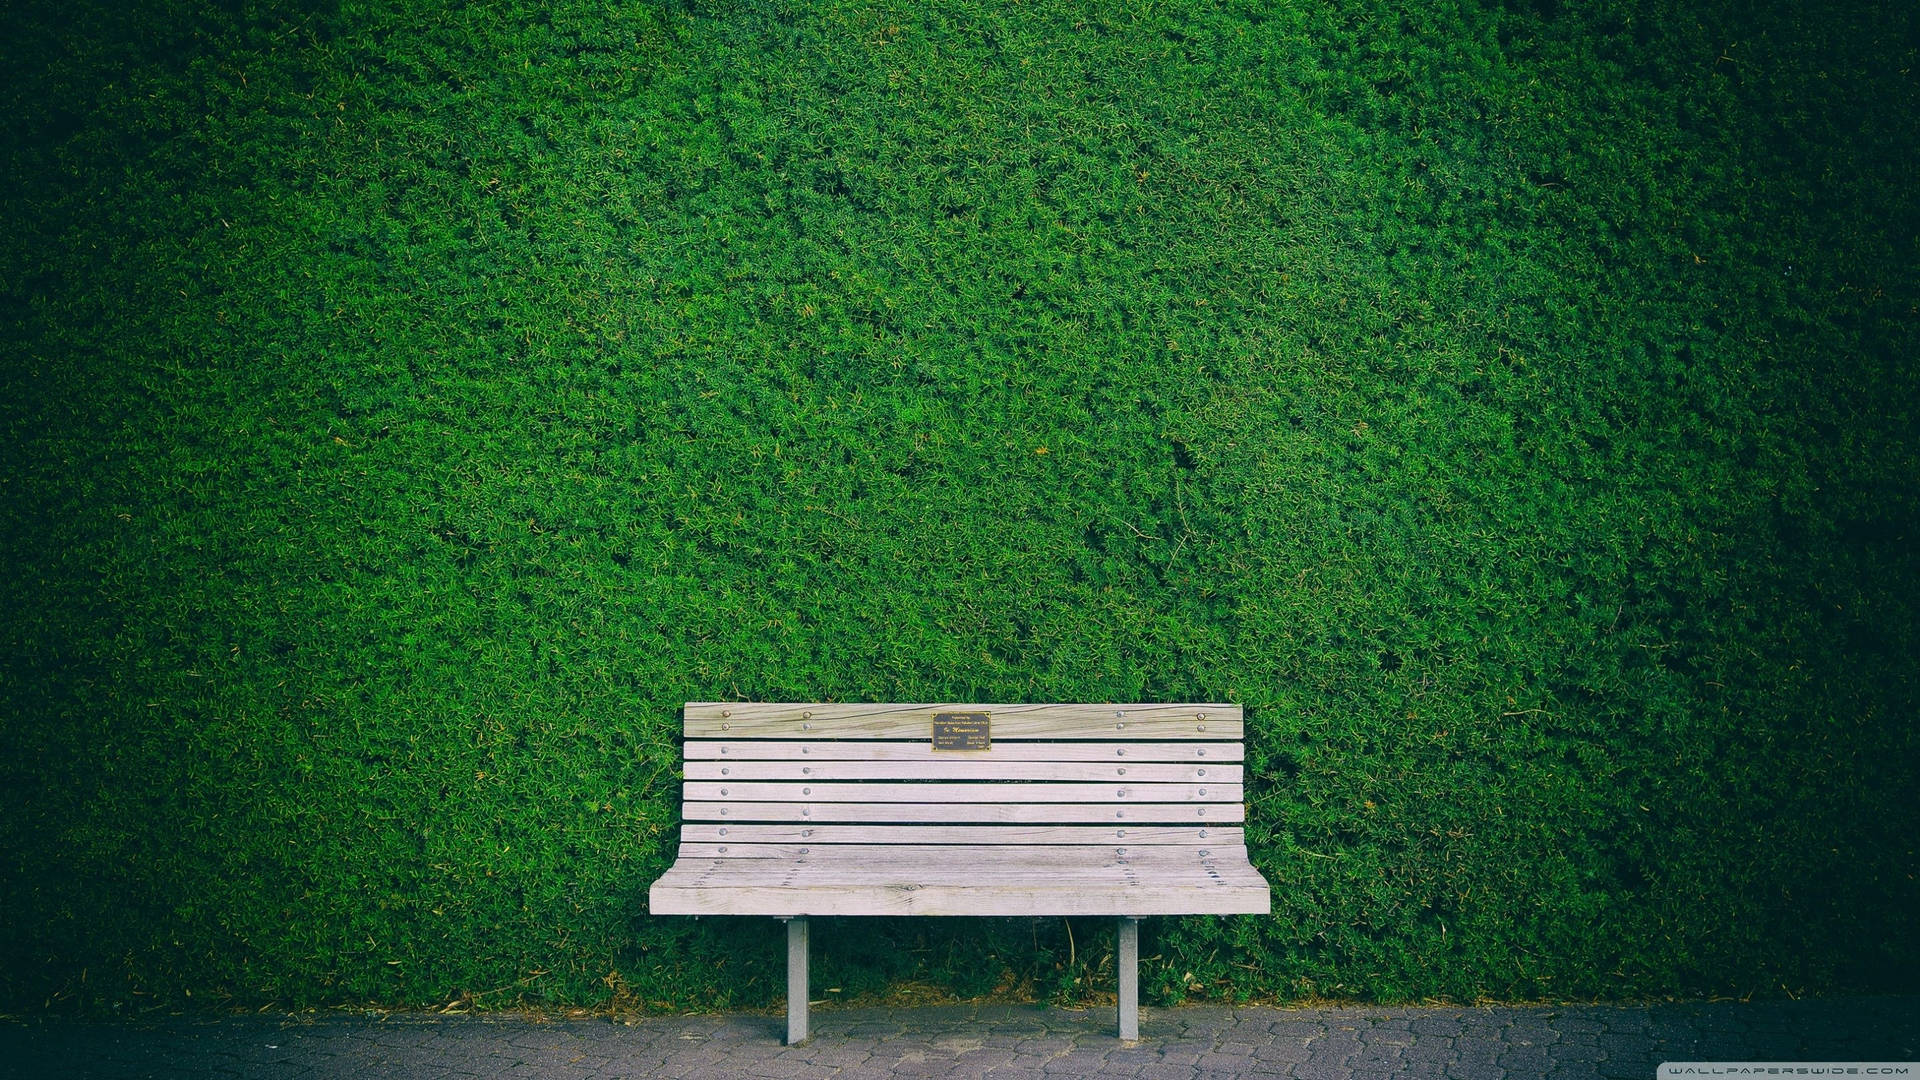 Solitary Bench Against A Mossy Green Wall